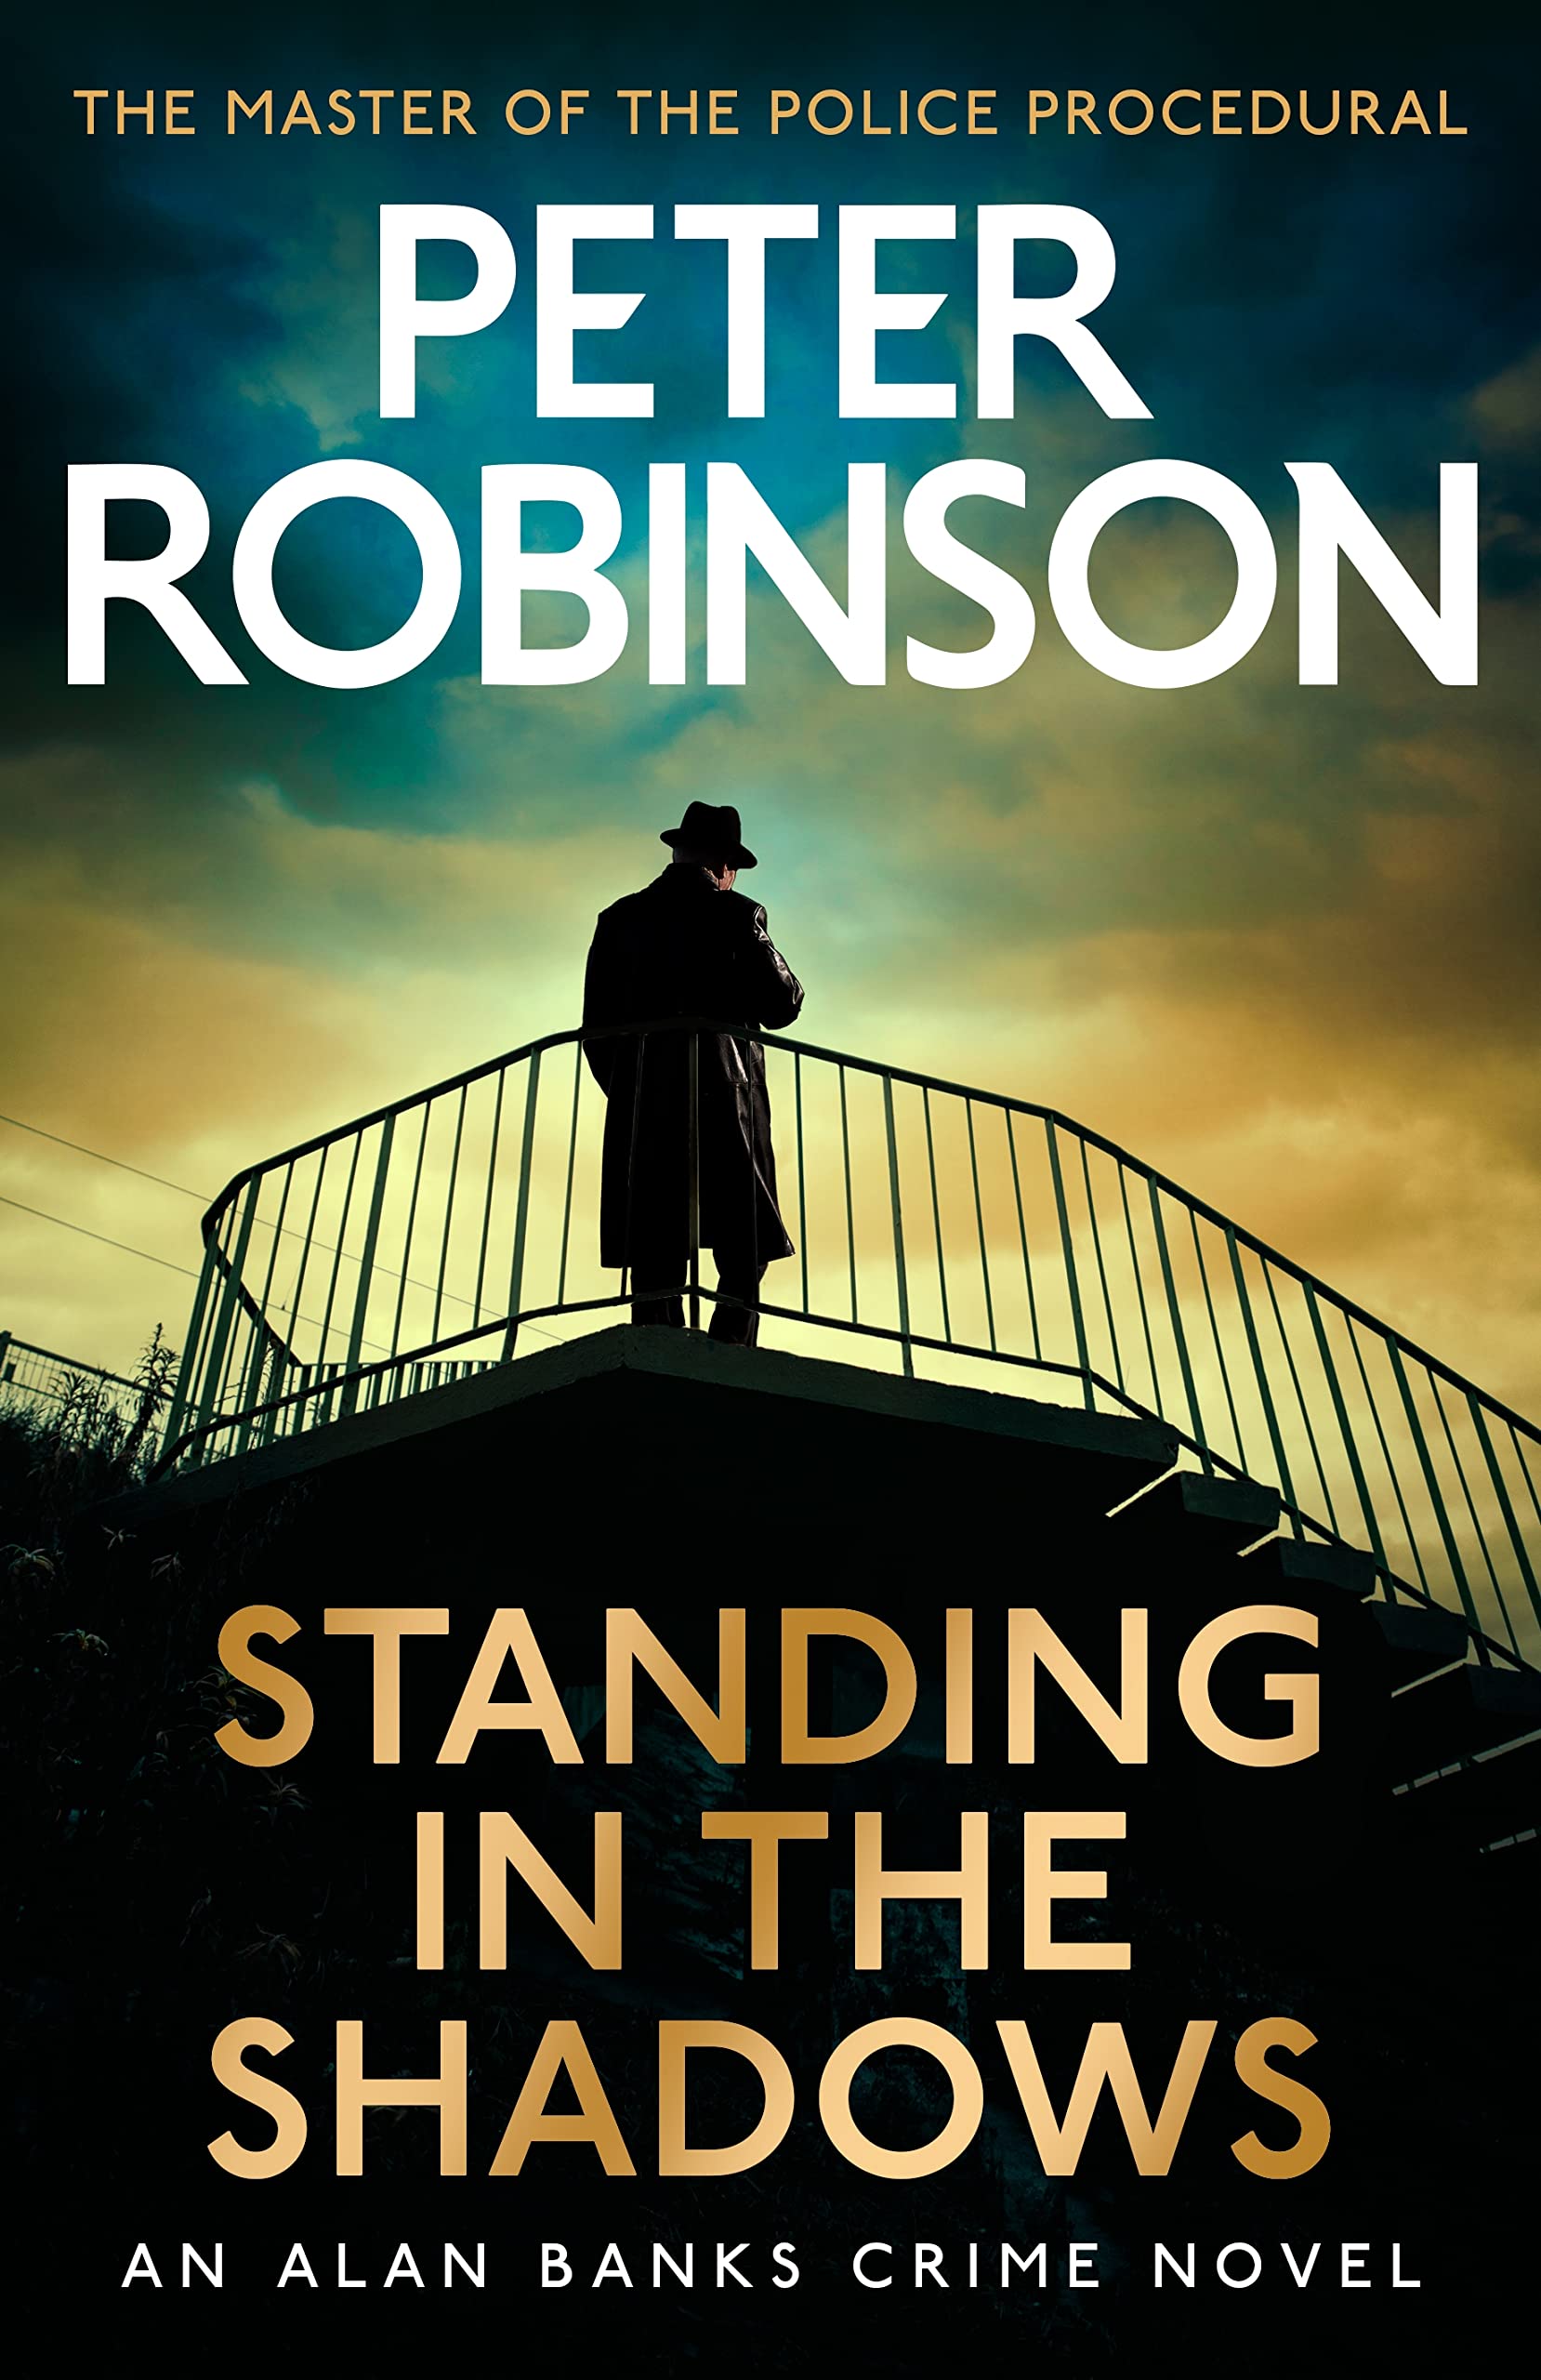 Peter_Robinsons_Standing_in_the_shadows book cover